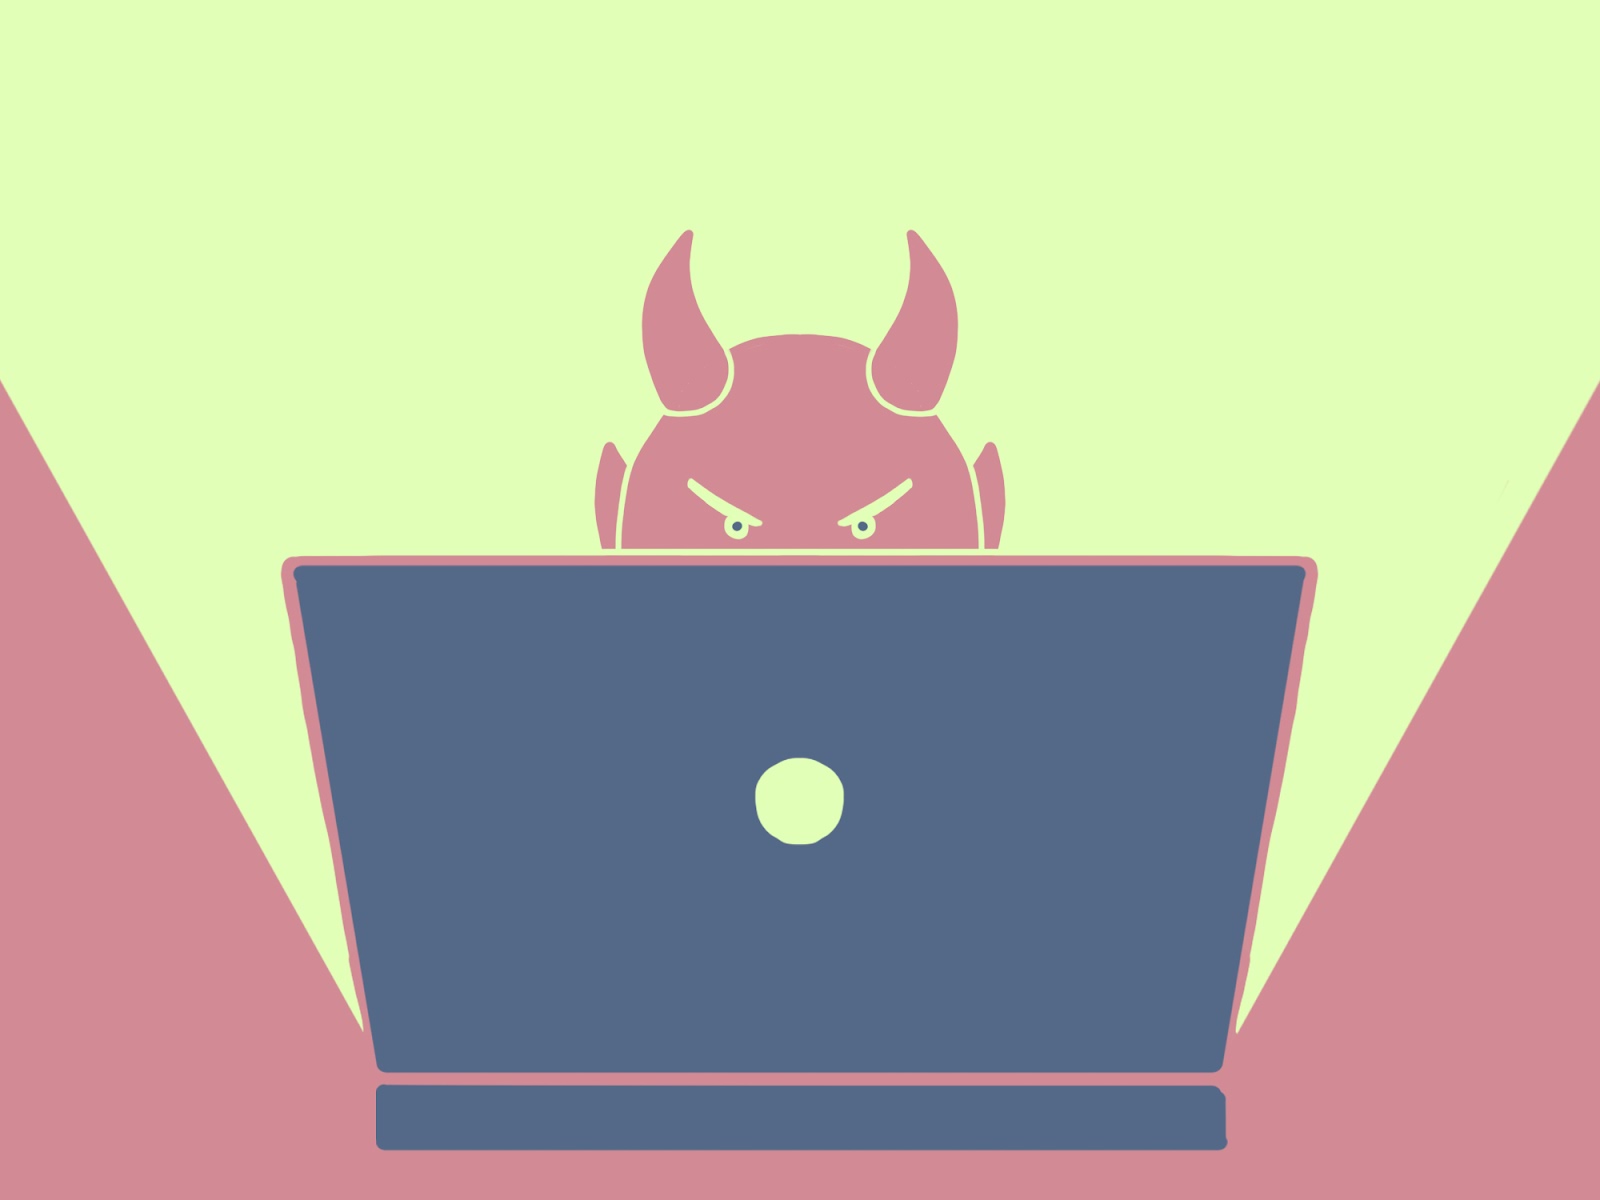 Evil forces now usually work online. Illustrated by kertburger.